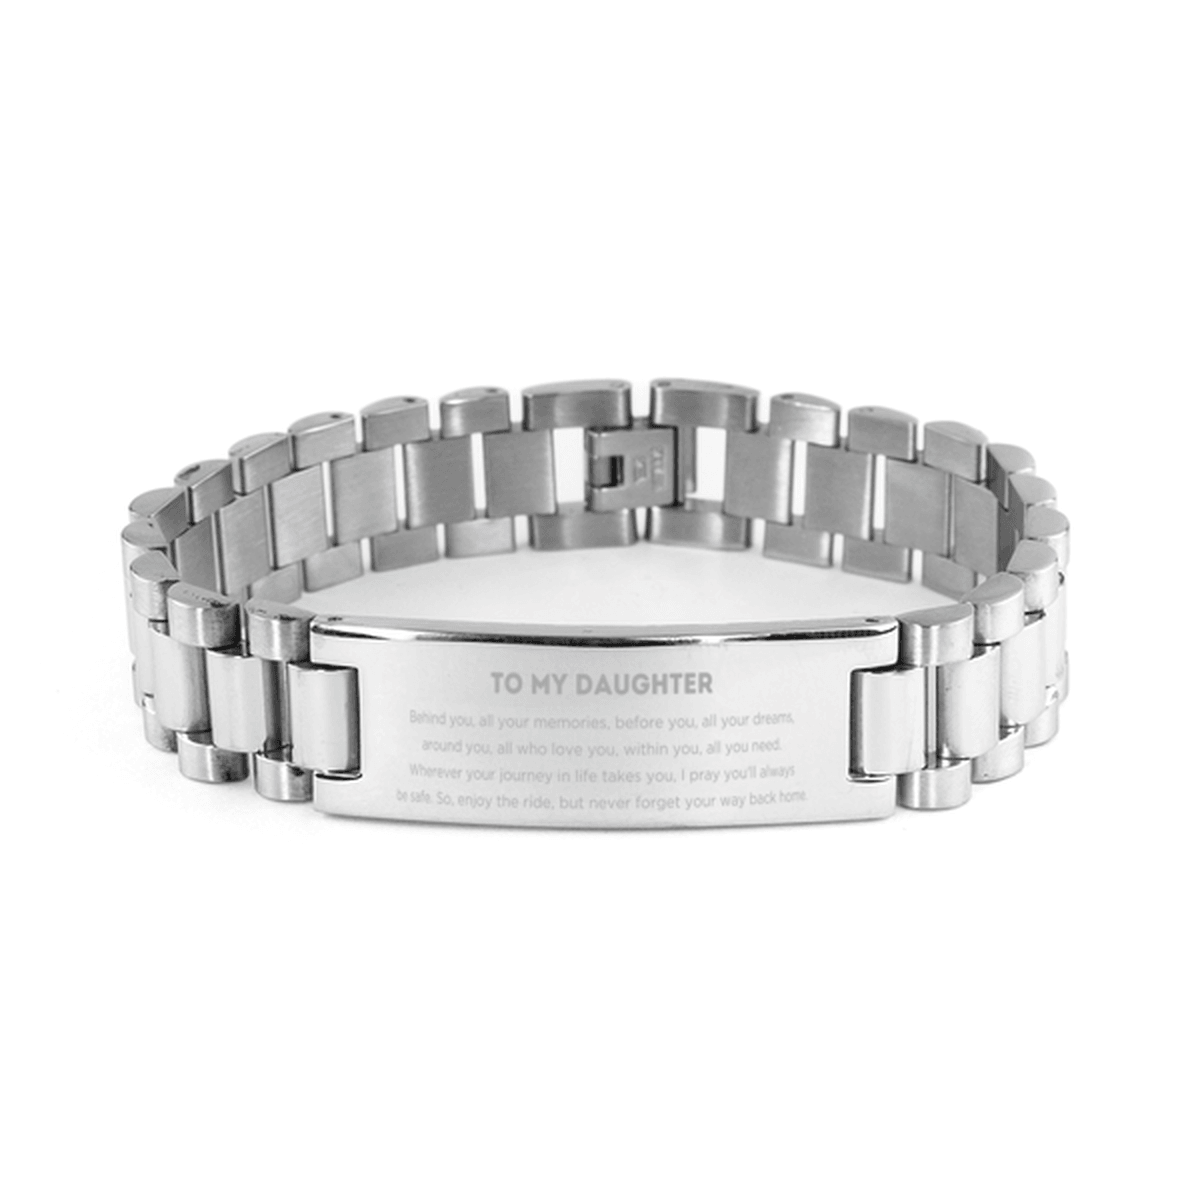 Daughter Ladder Stainless Steel Engraved Bracelet, Sentimental Birthday Christmas - Behind you, all your memories, before you, all your dreams, around you, all who love you, within you, all you need - Mallard Moon Gift Shop